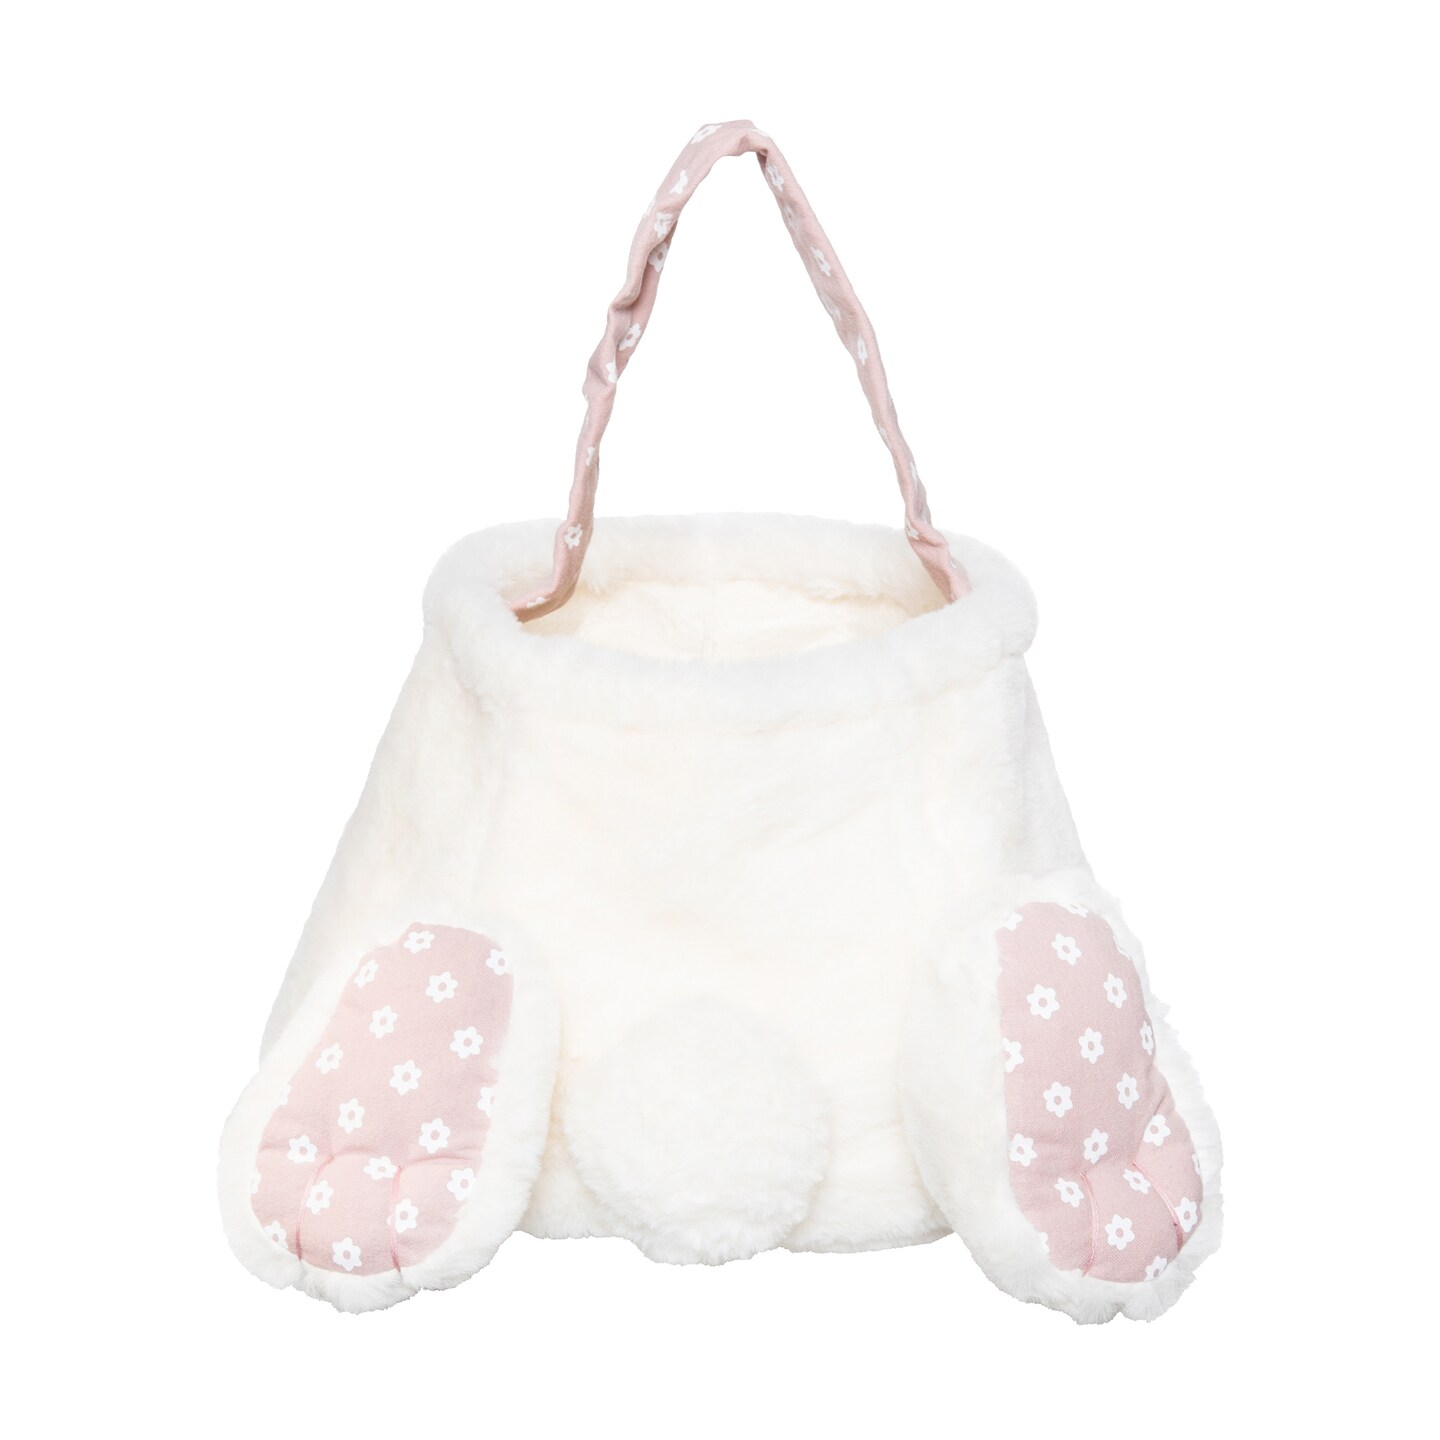 Cottontail Girl Basket